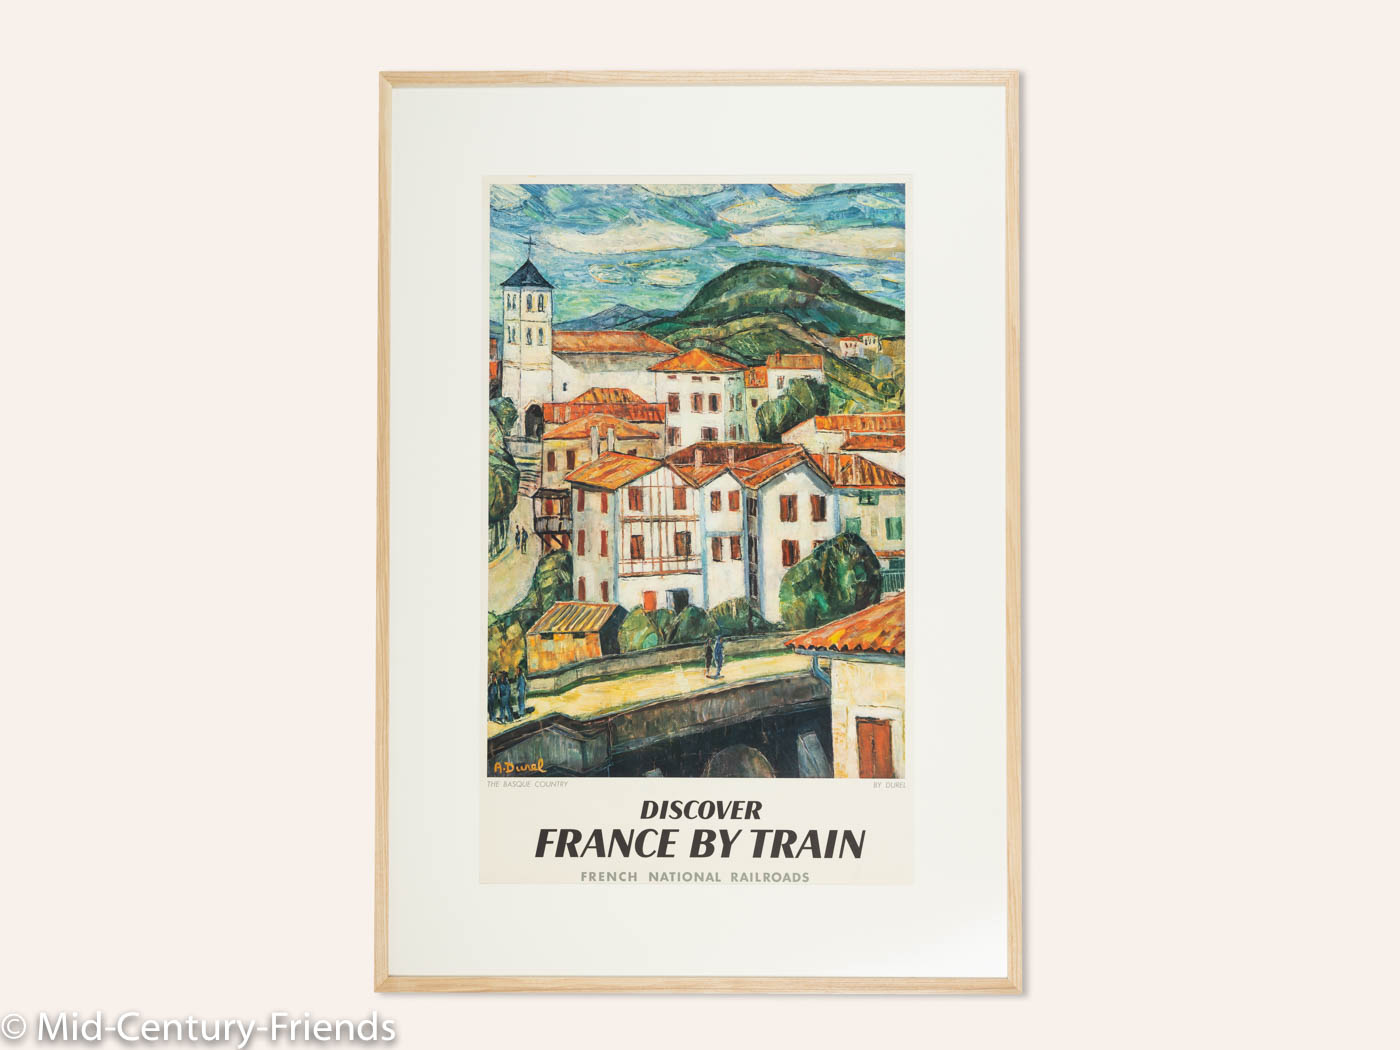 DISCOVER FRANCE BY TRAIN – THE BASQUE COUNTRY, SNCF REISEPOSTER, 87 X 124 CM